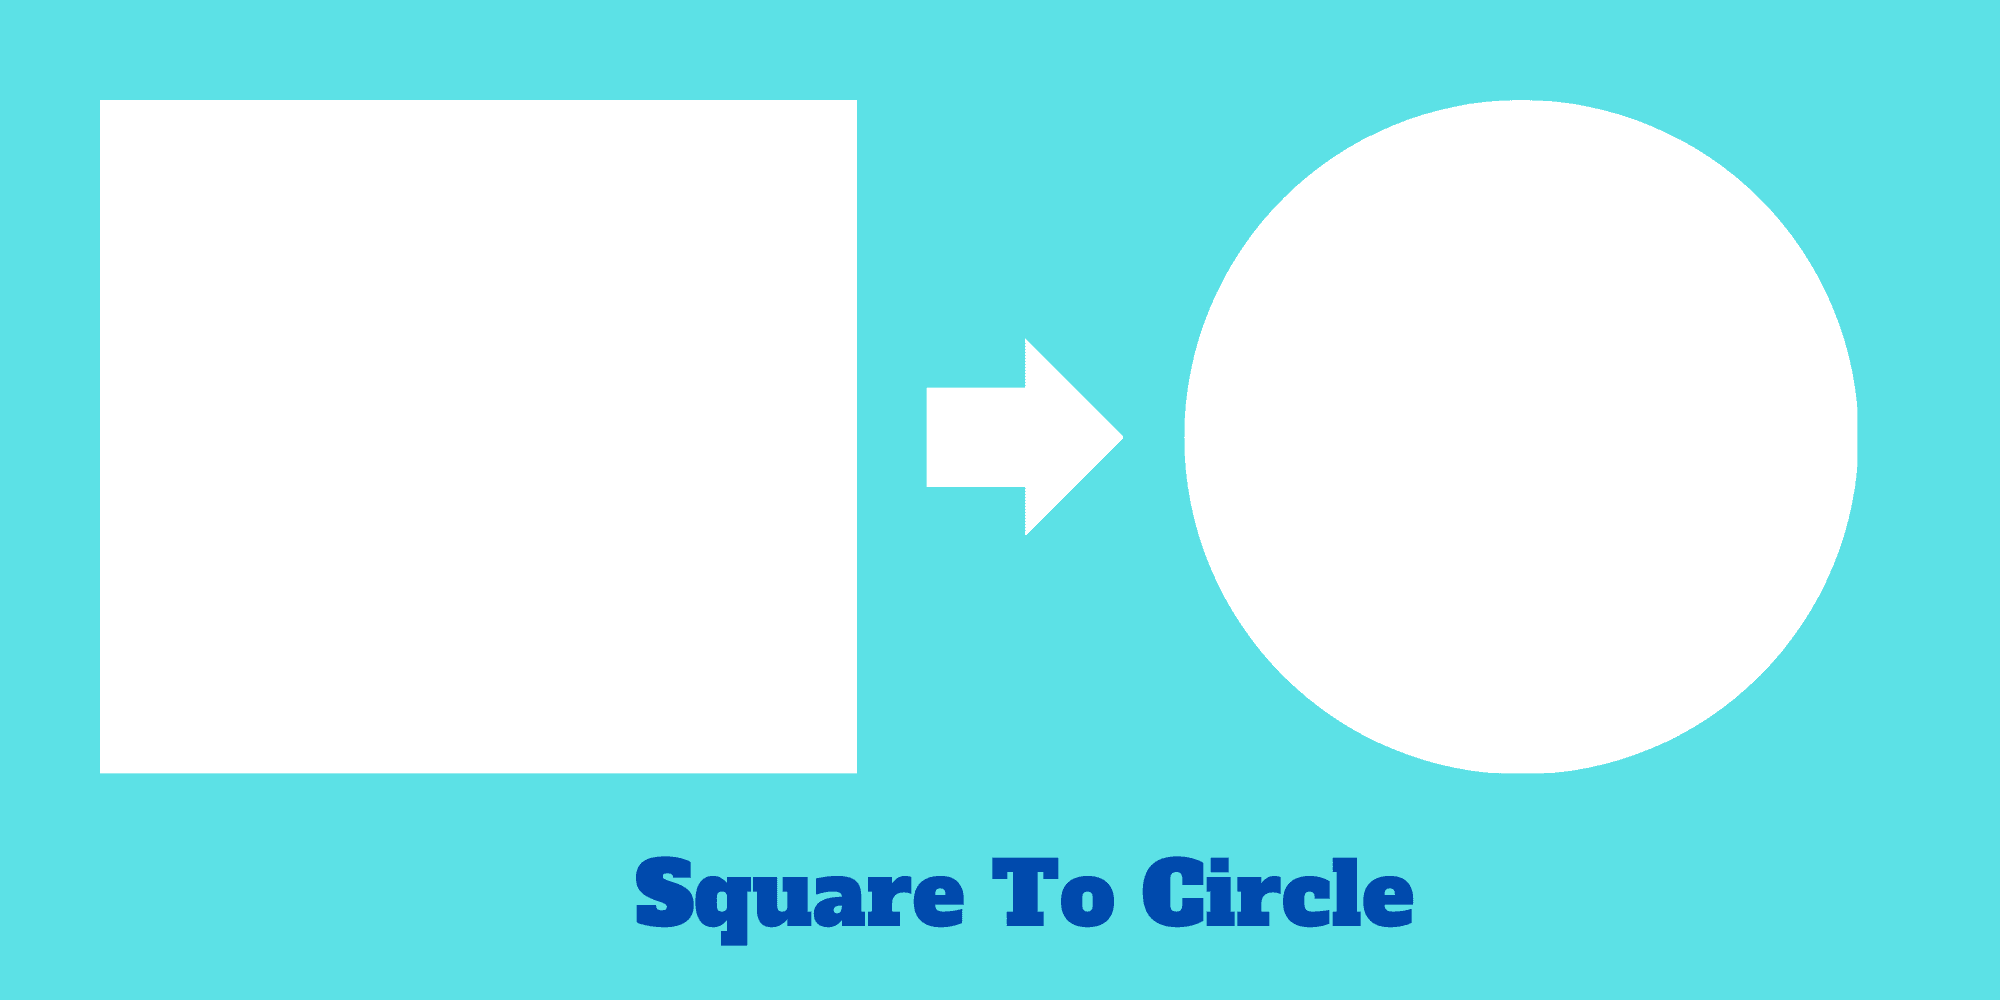 How to convert a square into a circle